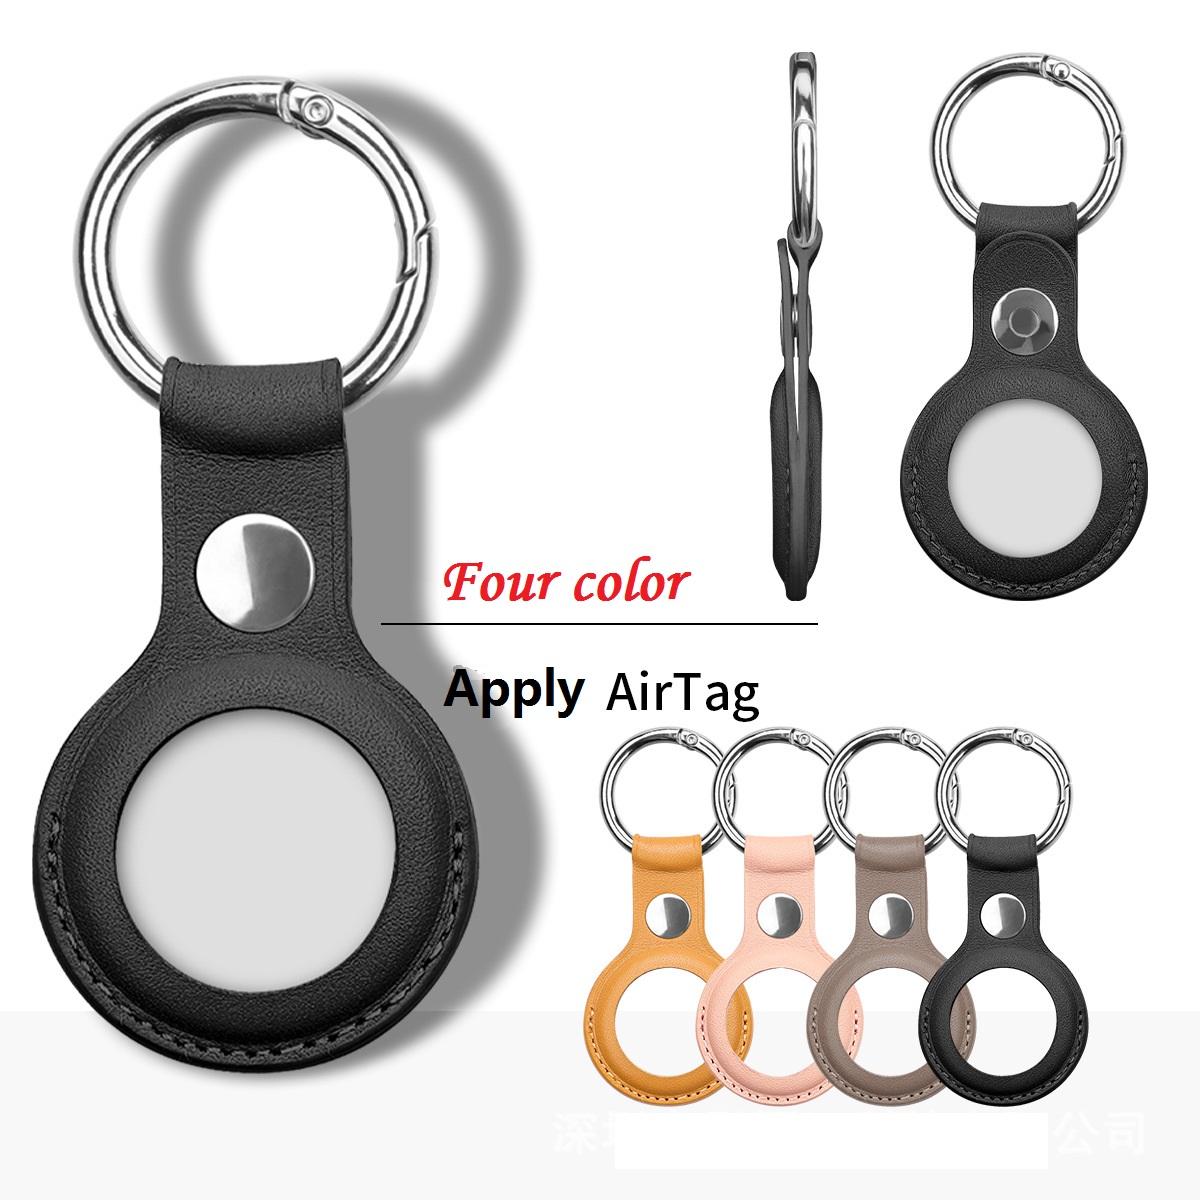 50pcs/lot Airtags Protective Case Keychains Anti Lost Real Leather Cases Protect Skin Cover Sleeve Bluetooth Tracker Keychain